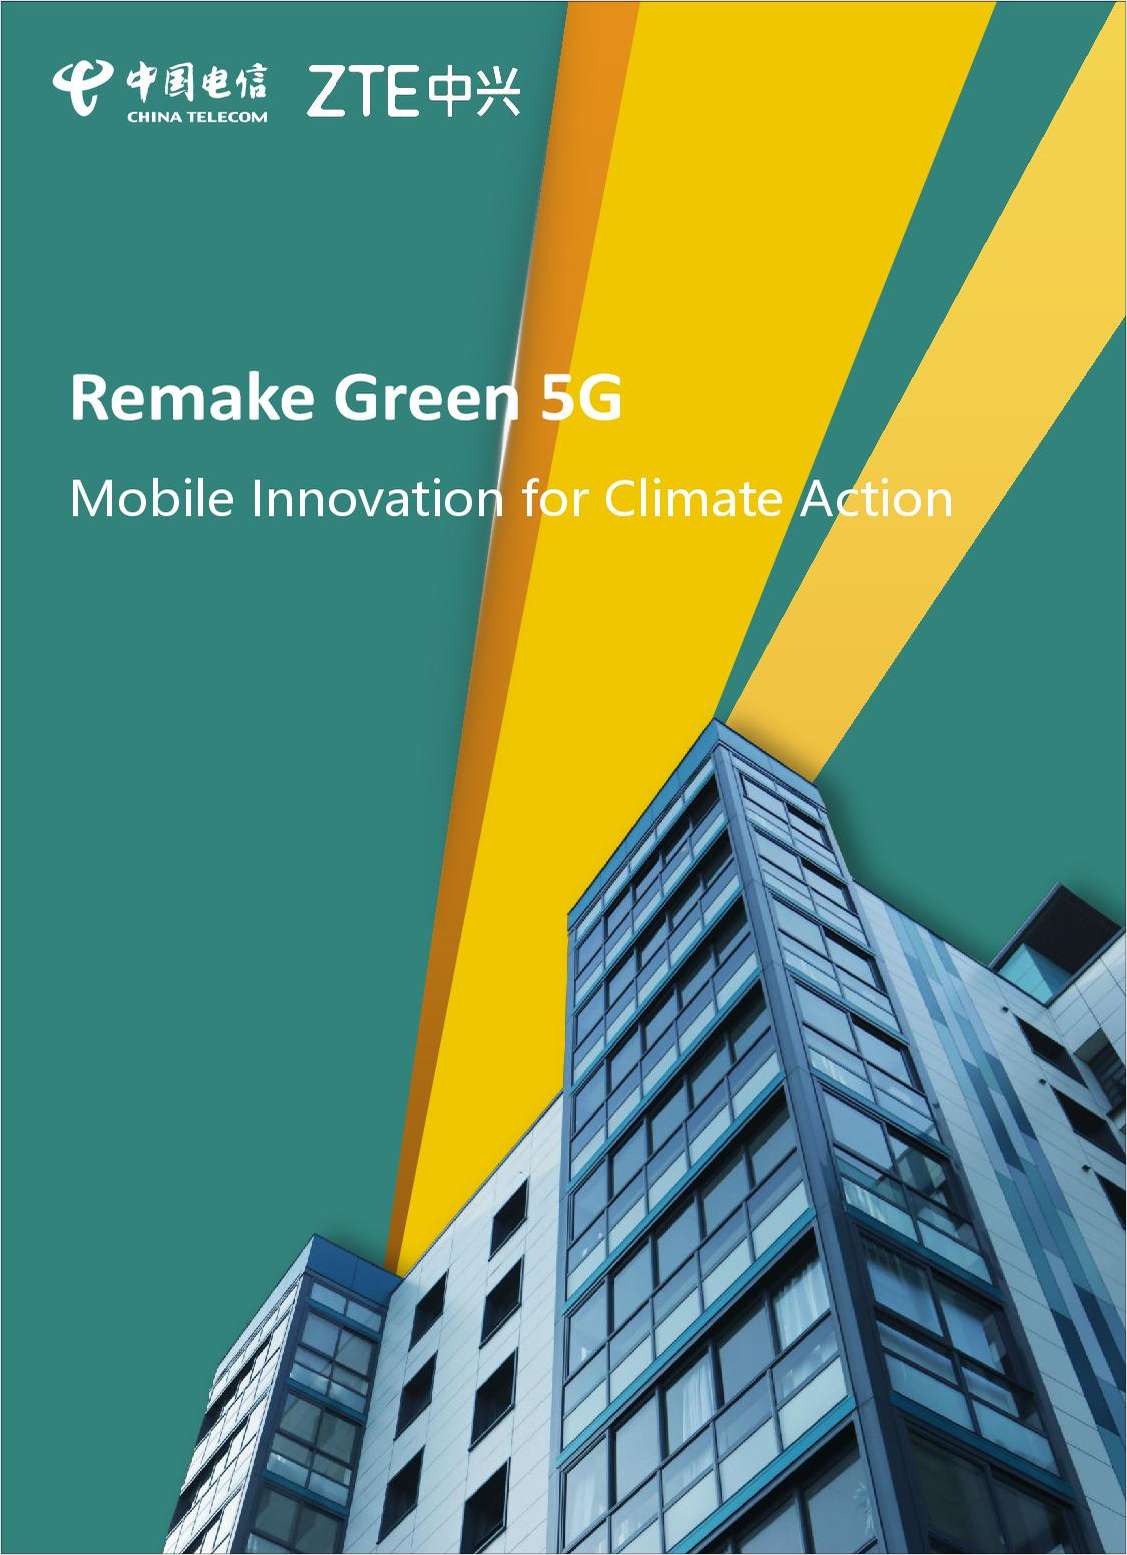 Remake Green 5G-Mobile Innovation for Climate Action